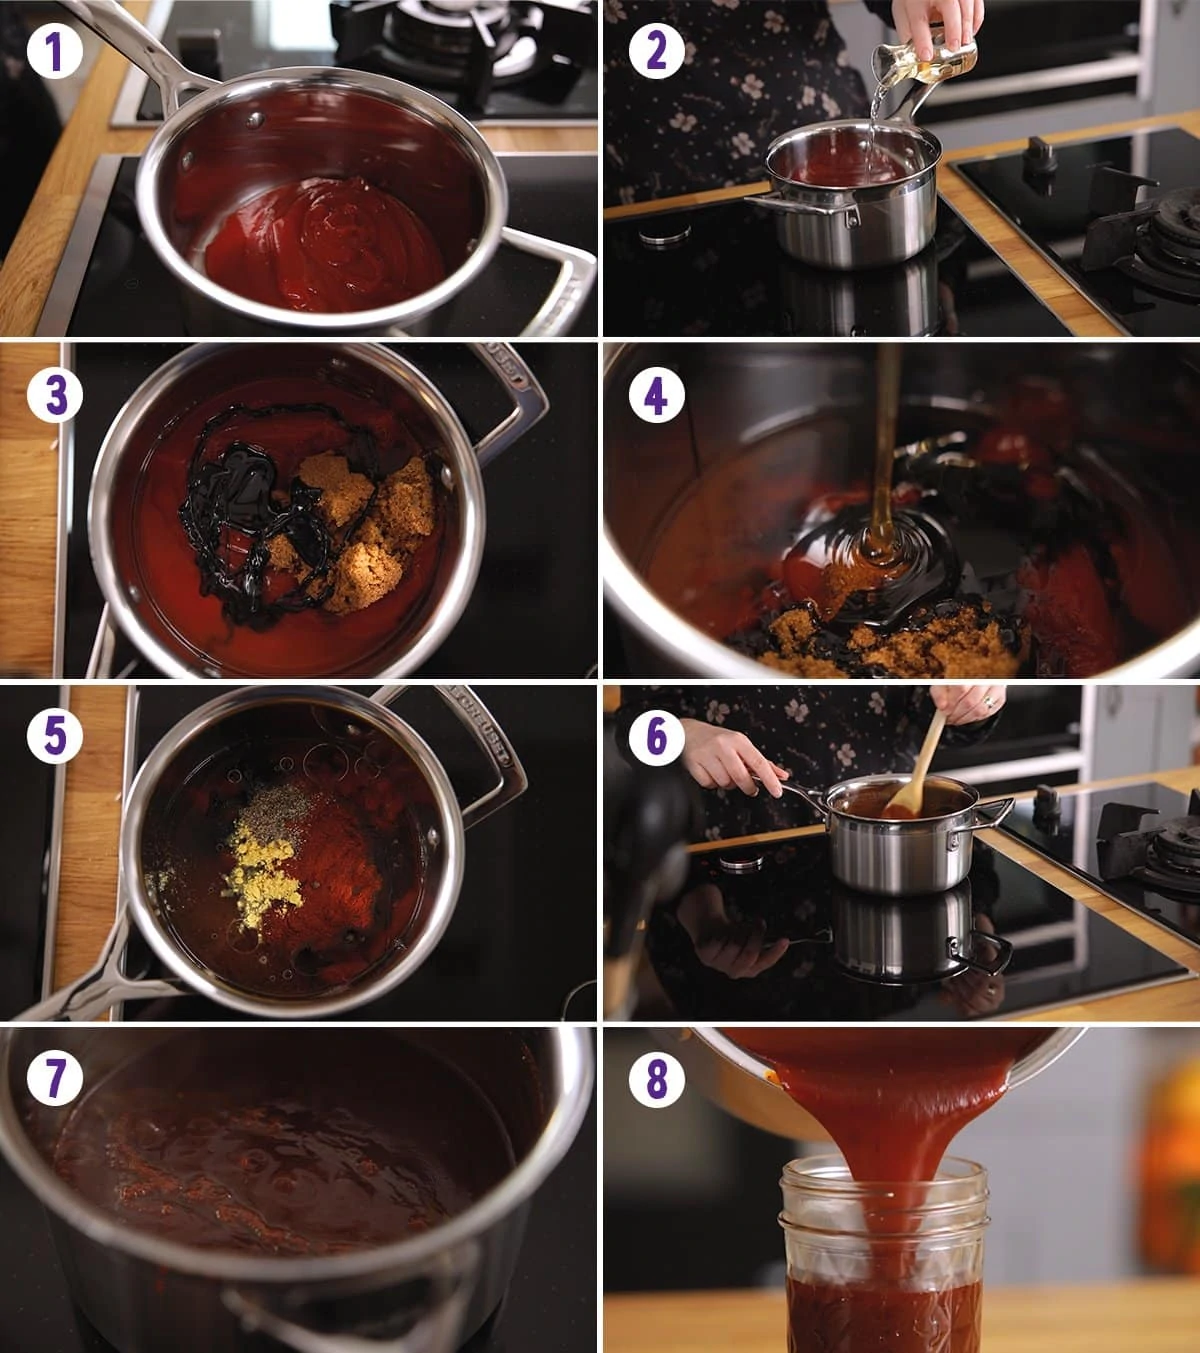 8 image collage showing how to make bbq sauce